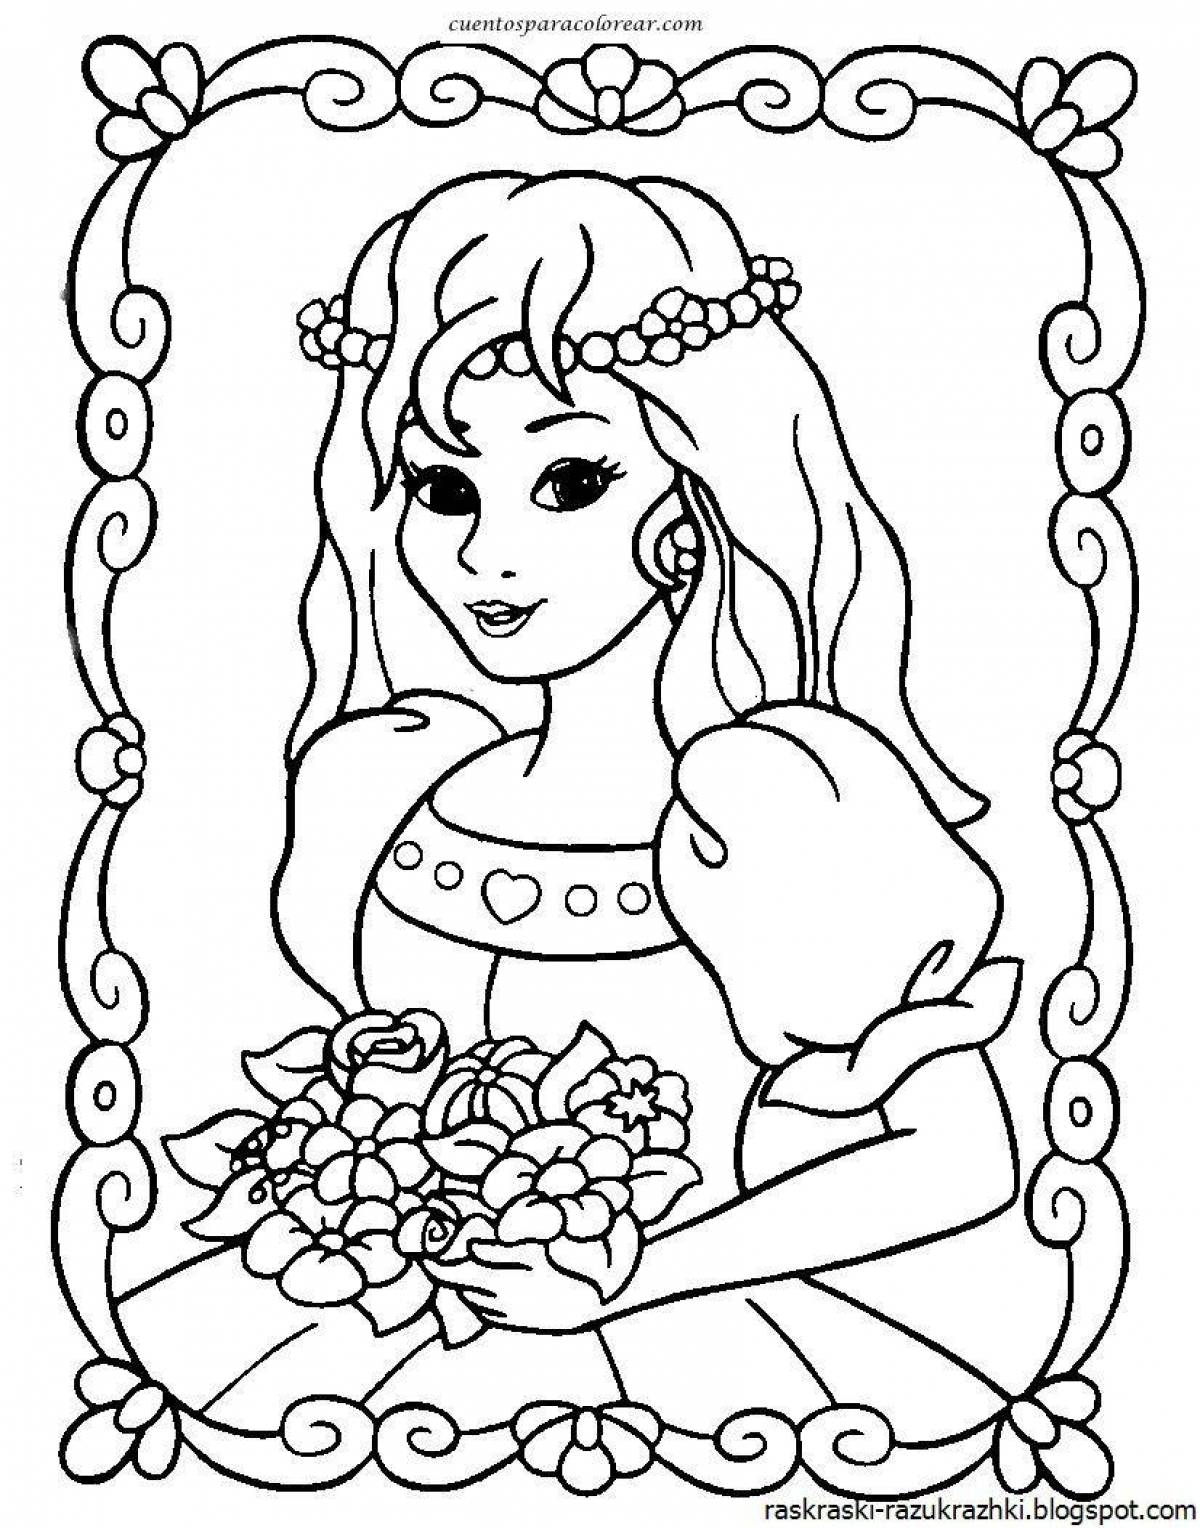 Exquisite coloring book for children 6-7 years old princess